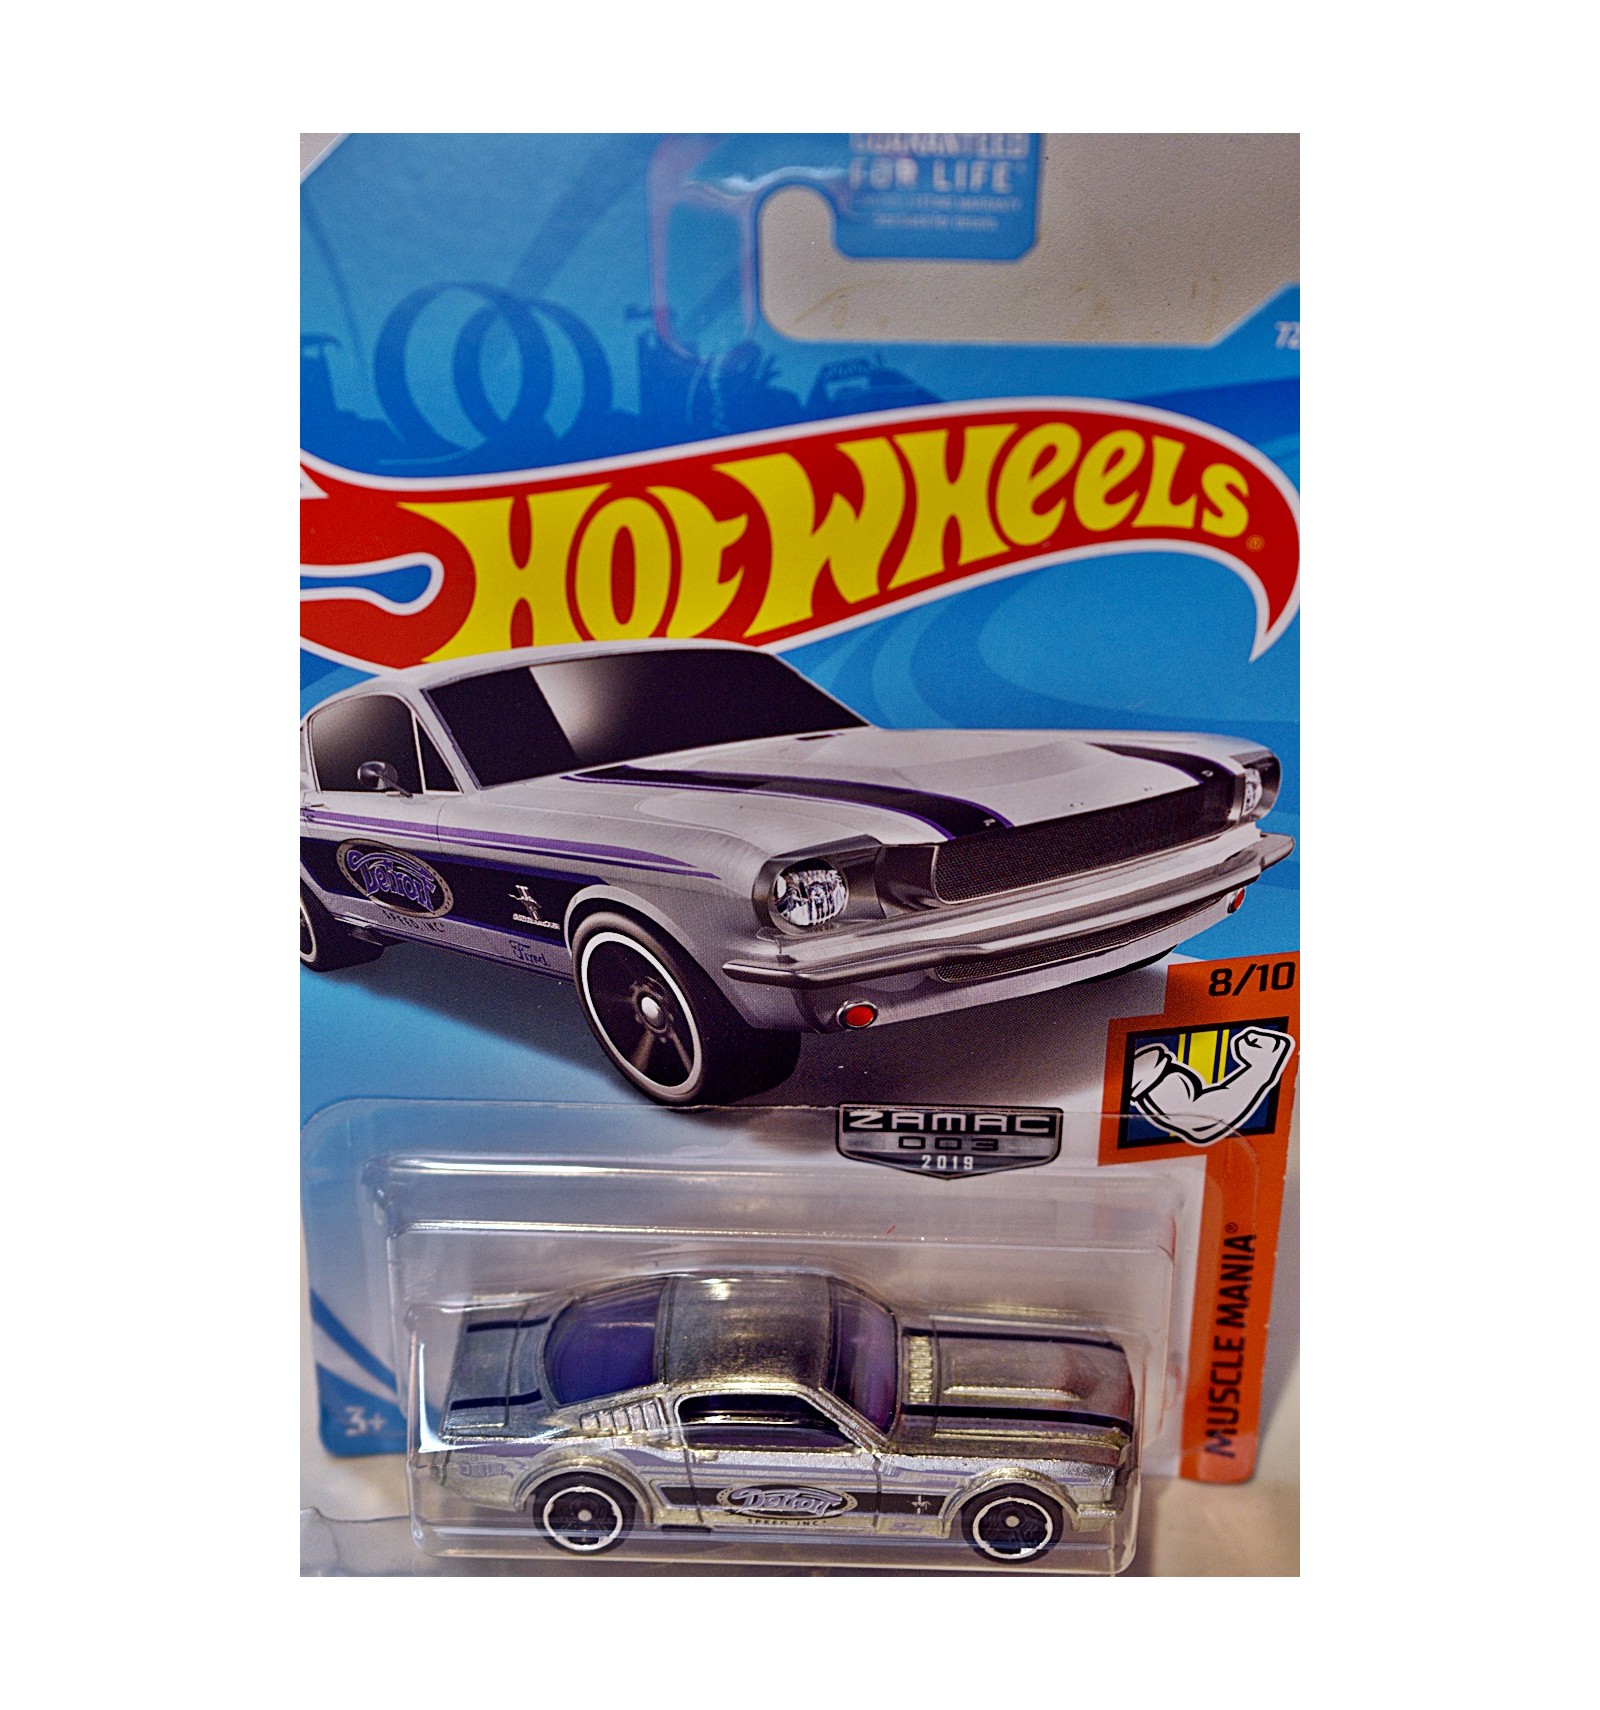 Hot Wheels 2019 '65 Mustang 2+2 Fastback New Collectable Toy Model Car. 